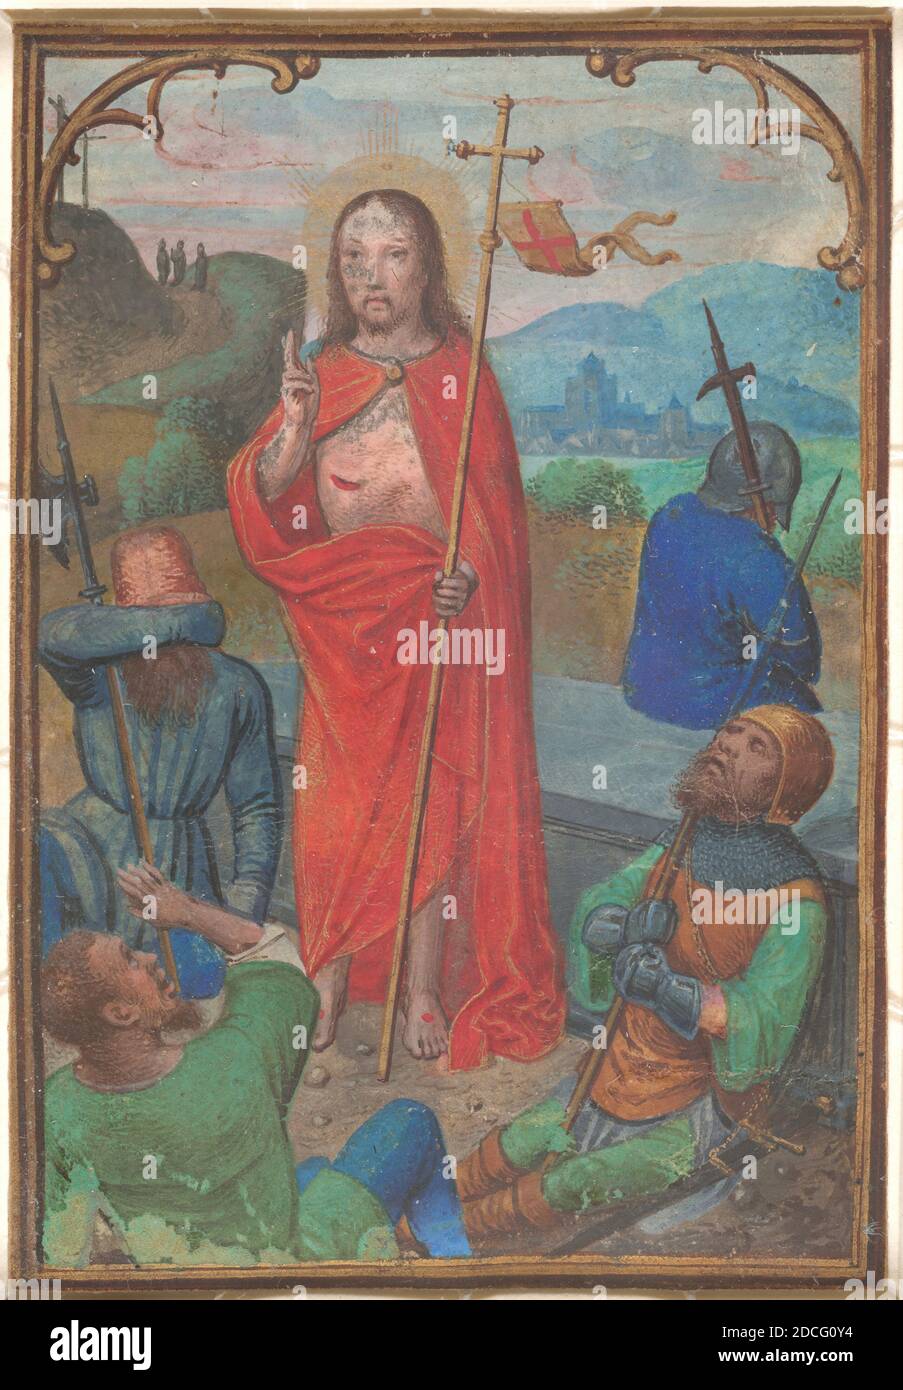 Simon Bening, (artist), Flemish, 1483/1484 - 1561, The Resurrection,  Miniature from a Book of Hours(?), (series), c. 1530, miniature on vellum,  overall: 7 x 4.8 cm (2 3/4 x 1 7/8 in Stock Photo - Alamy